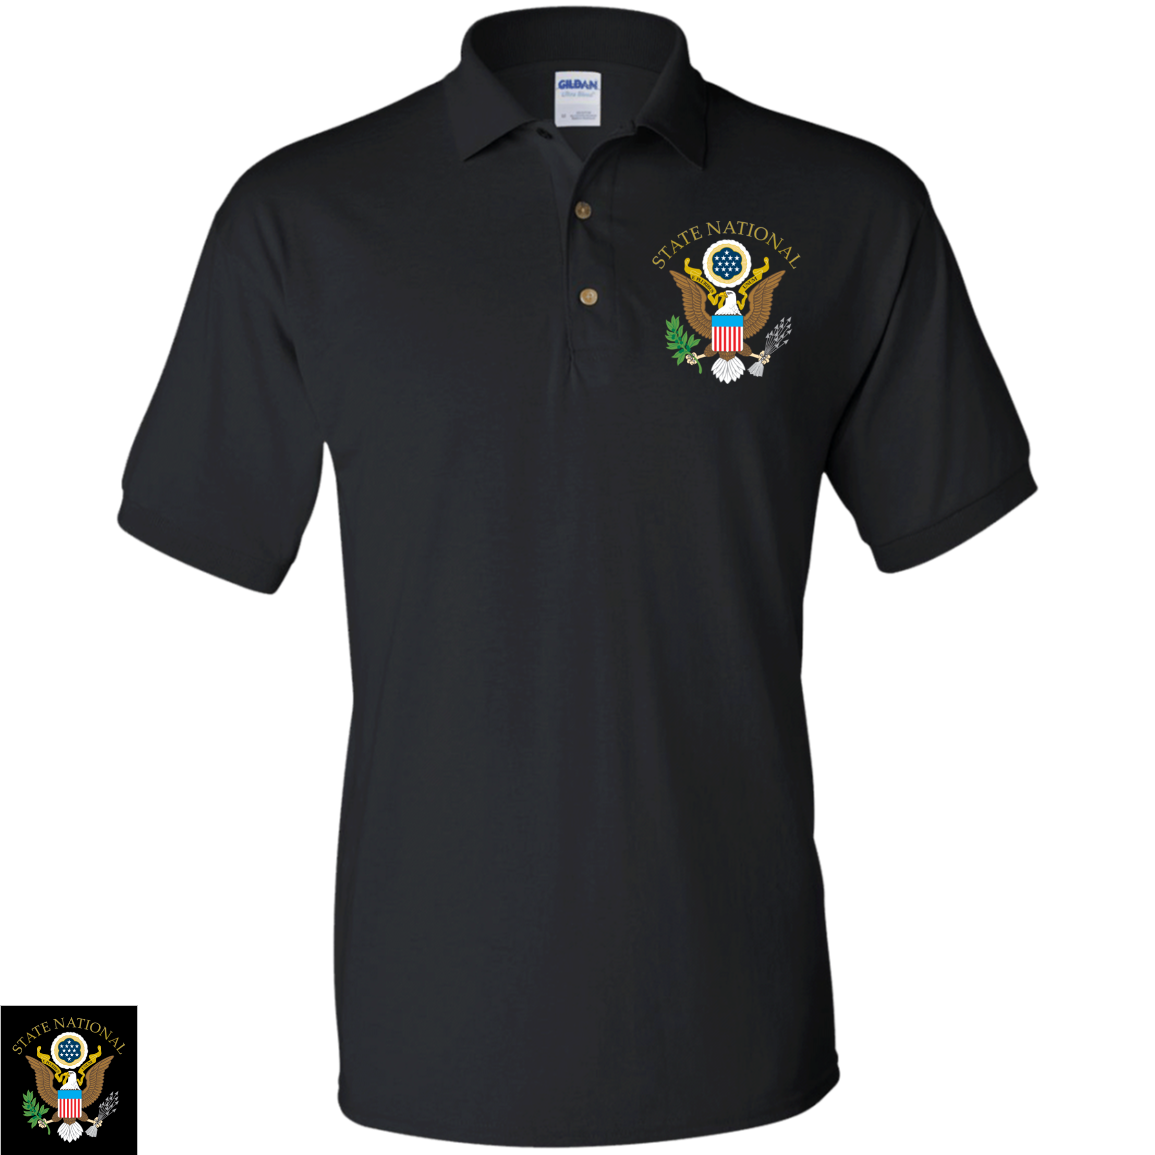 State National Polo